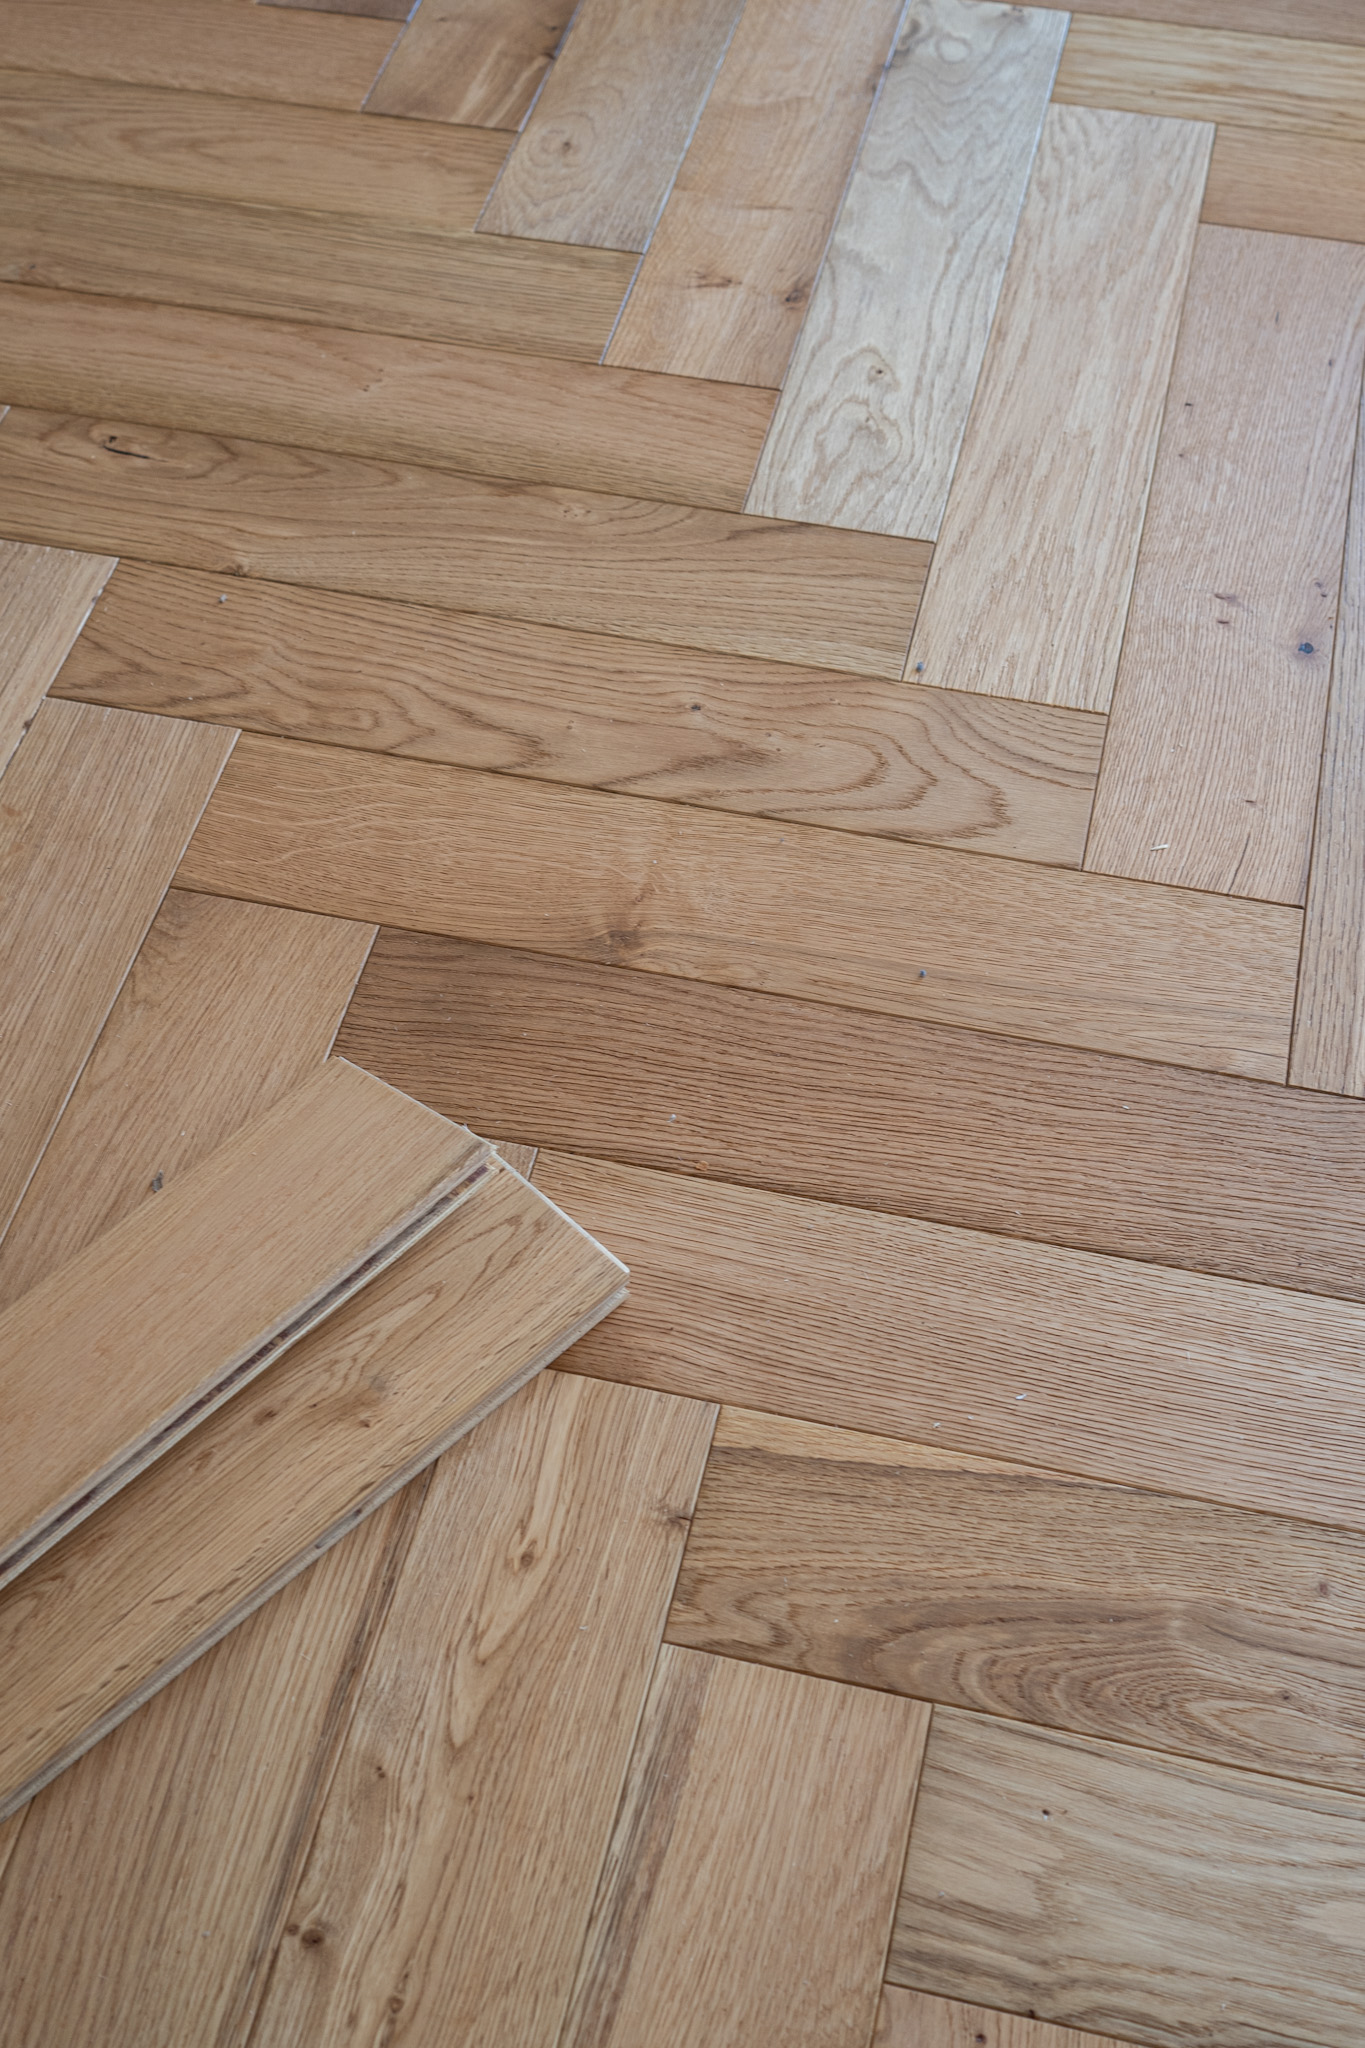 Is Engineered Wood Better than Solid Wood Flooring?